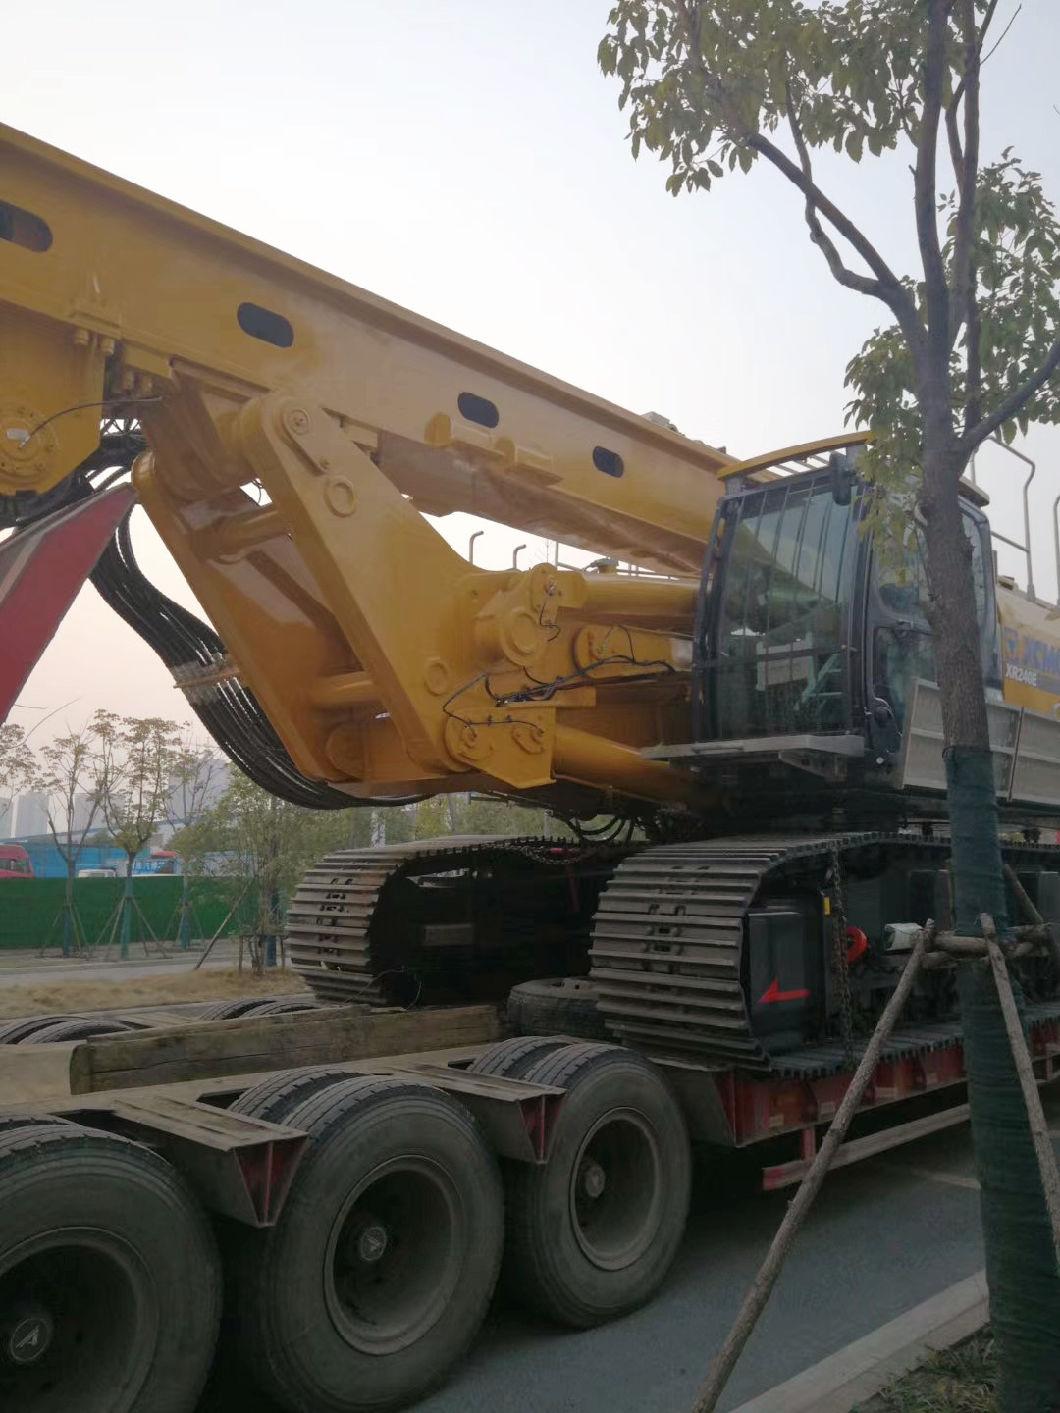 460kn. M Hydraulic Rotary Water Well Drilling Rig for Sale